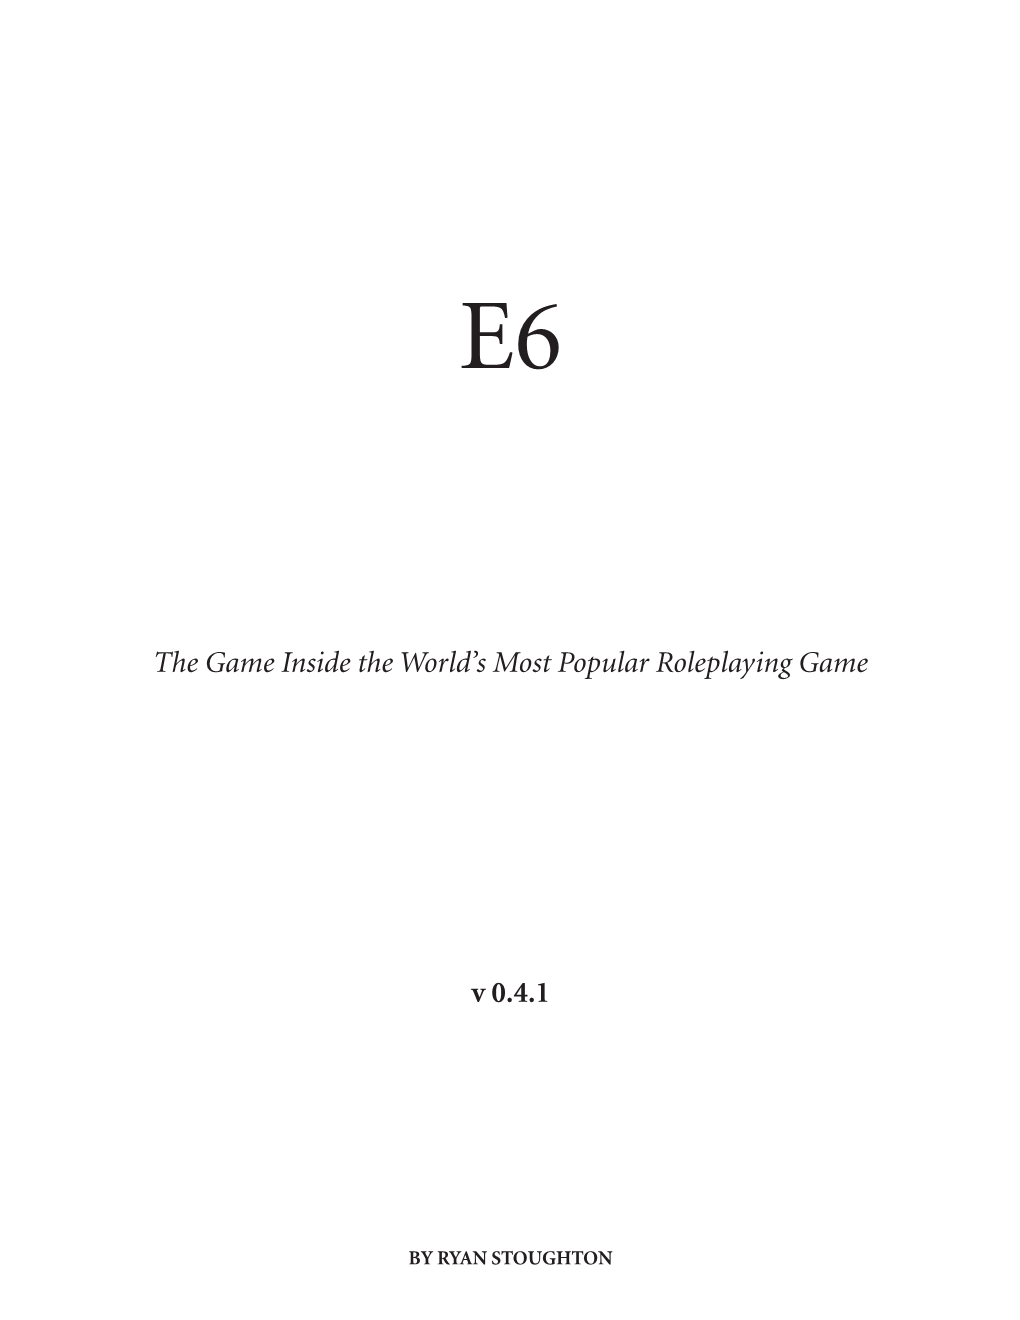 E6: the Game Inside the World's Most Popular Roleplaying Game